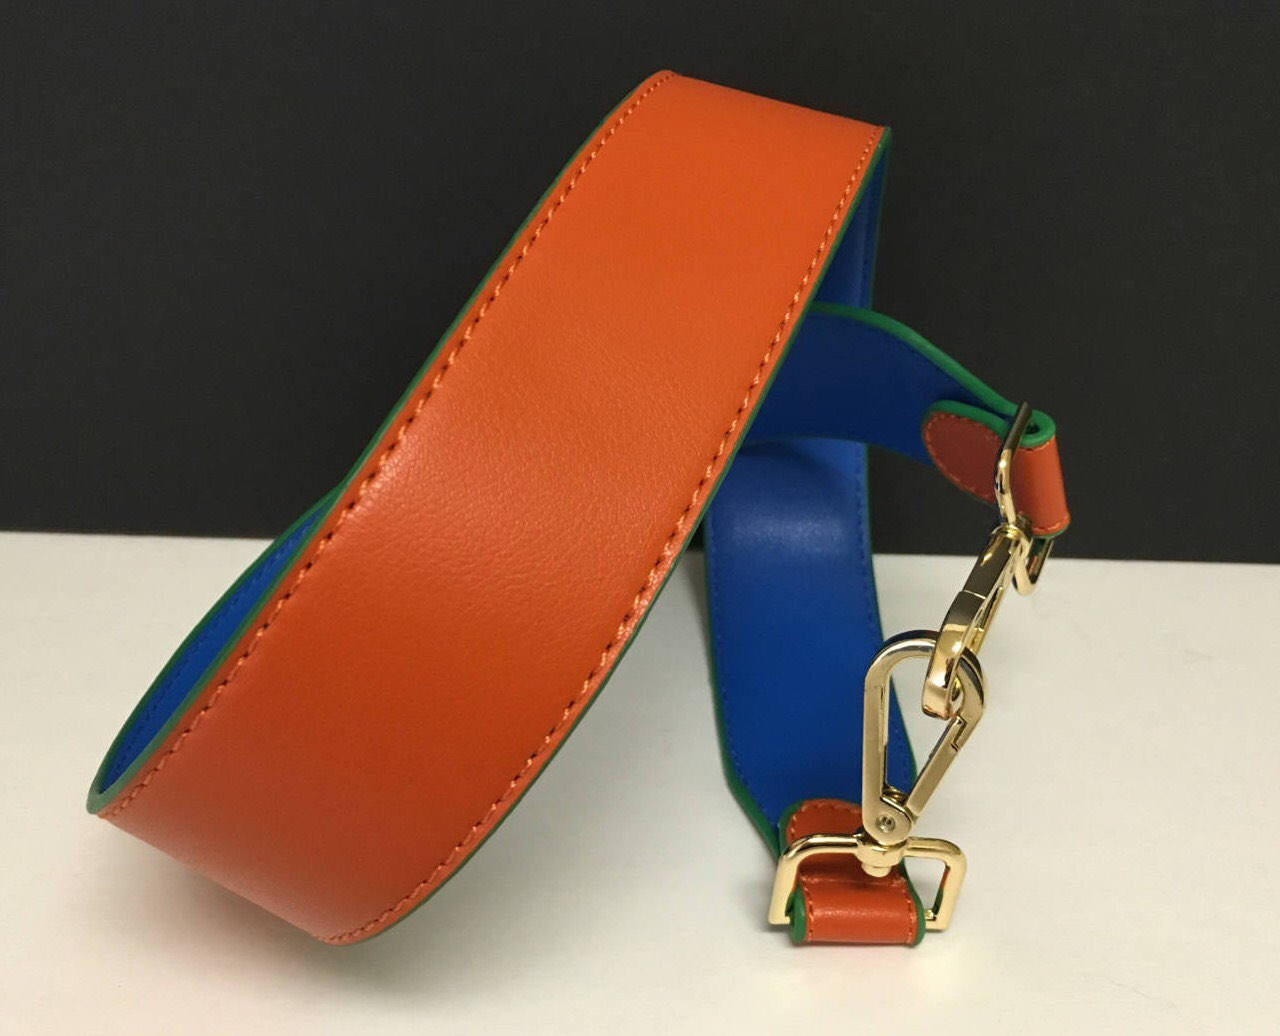 Strap You - Leather Bag Strap - Colorful Leather Strap Removable Strap for Bag and Purses ...